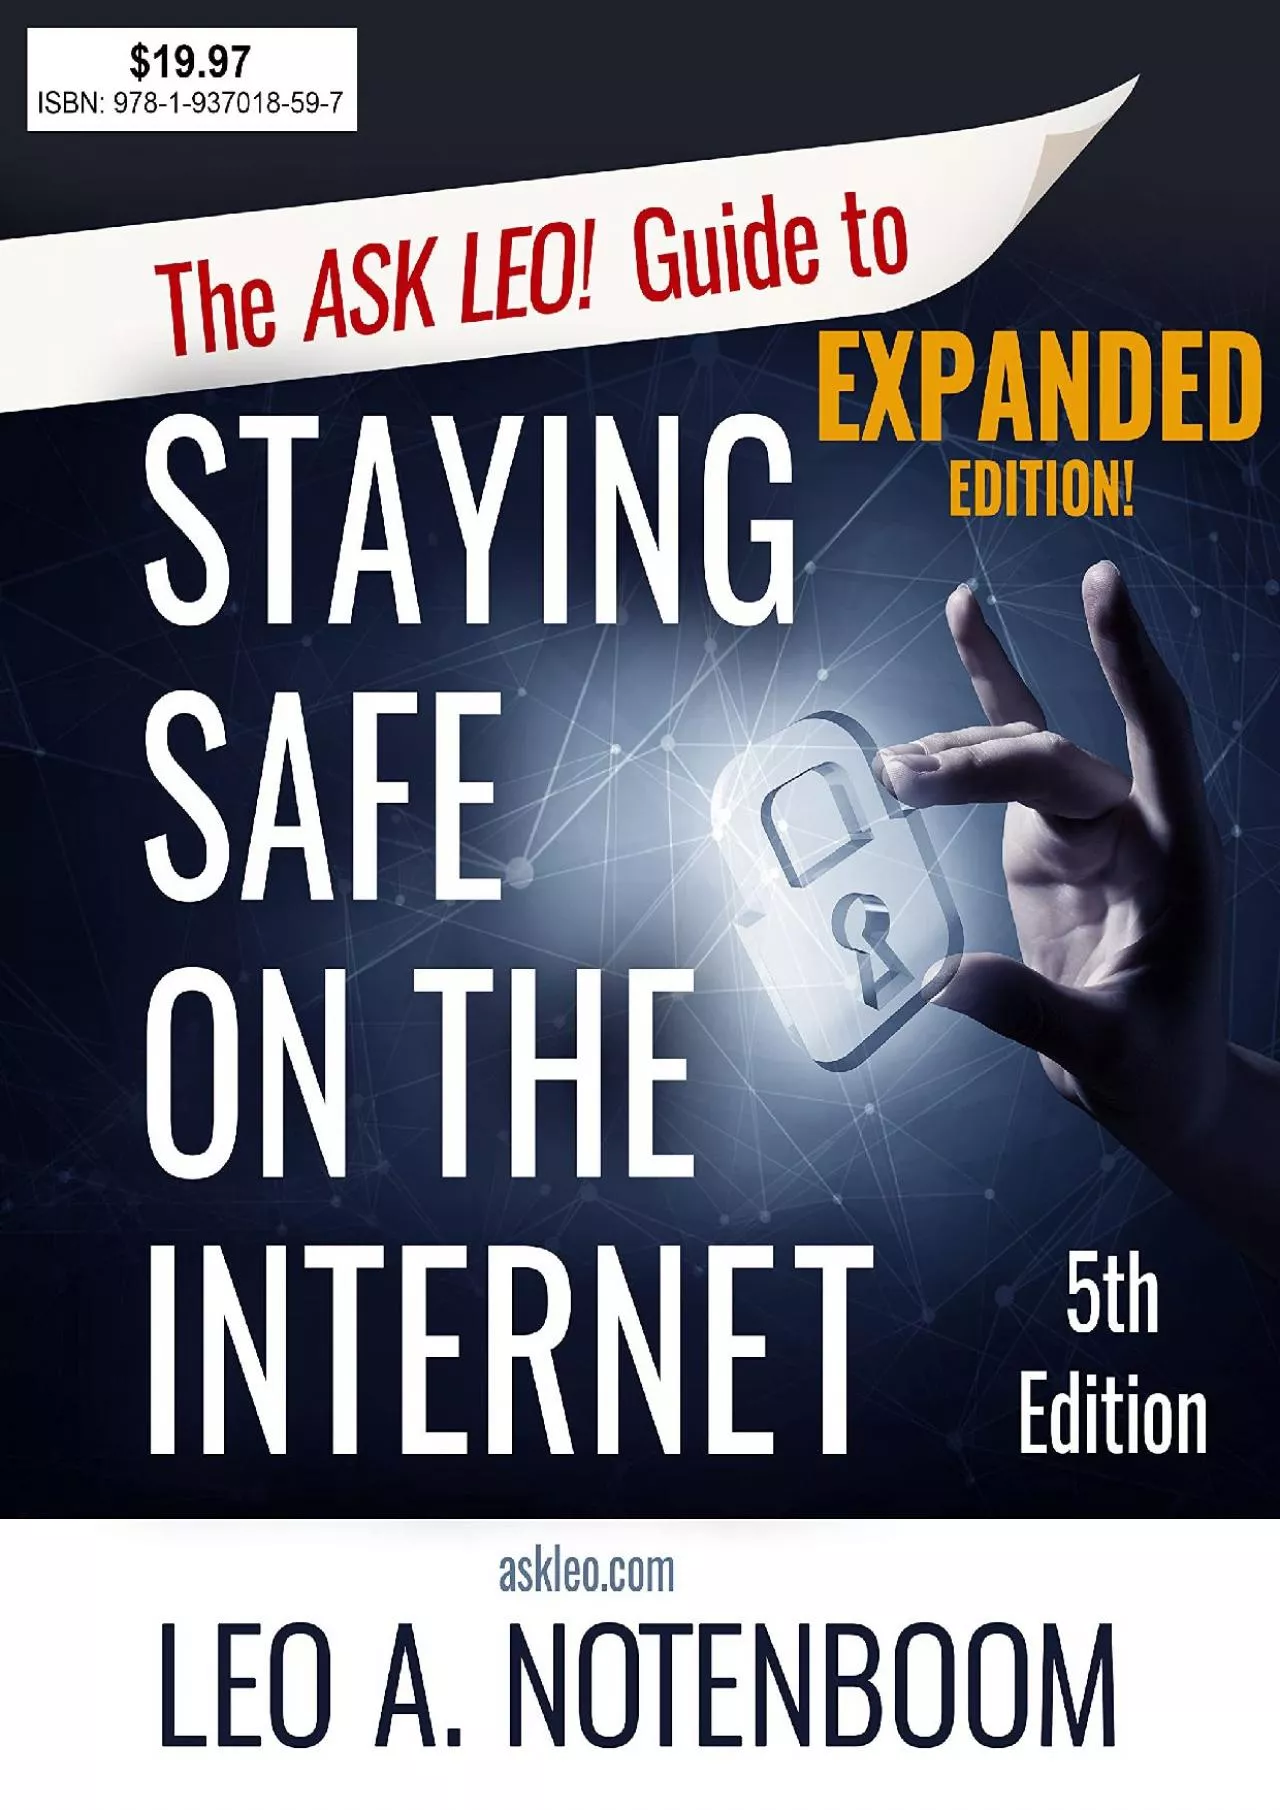 [BEST]-The Ask Leo! Guide to Staying Safe on the Internet - Expanded 5th Edition: Keep